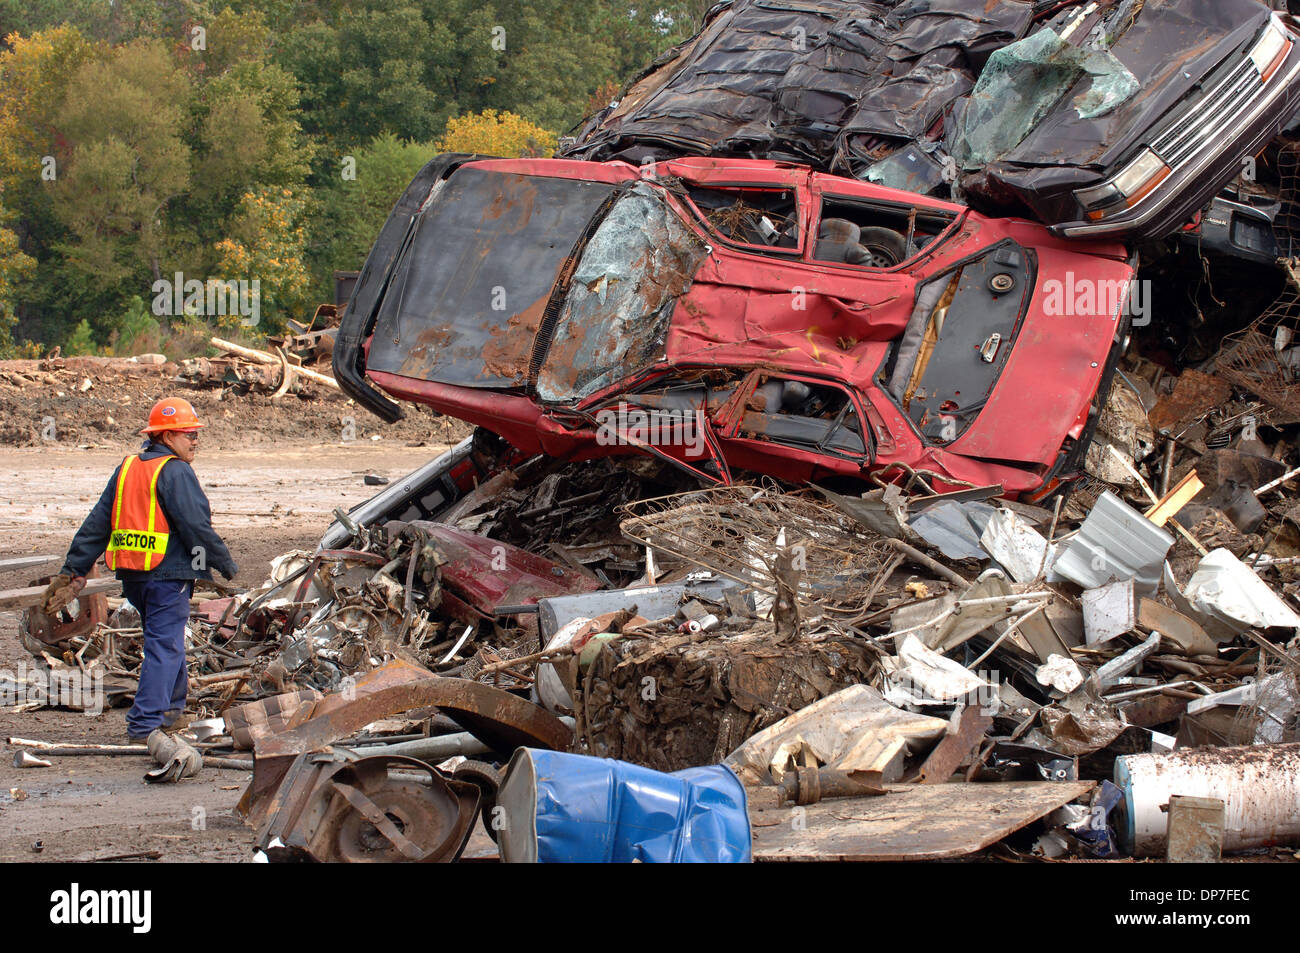 Nov 15, 2006; Atlanta, GA, USA; Crushed and stripped autos are readied for scrapping at scrap metal operation. Some larger peices of metal are cut down with cutting torches and then flattened by huge machines, then metal is recycled by being melted down for re-use. Mandatory Credit: Photo by Robin Nelson/ZUMA Press. (©) Copyright 2006 by Robin Nelson Stock Photo